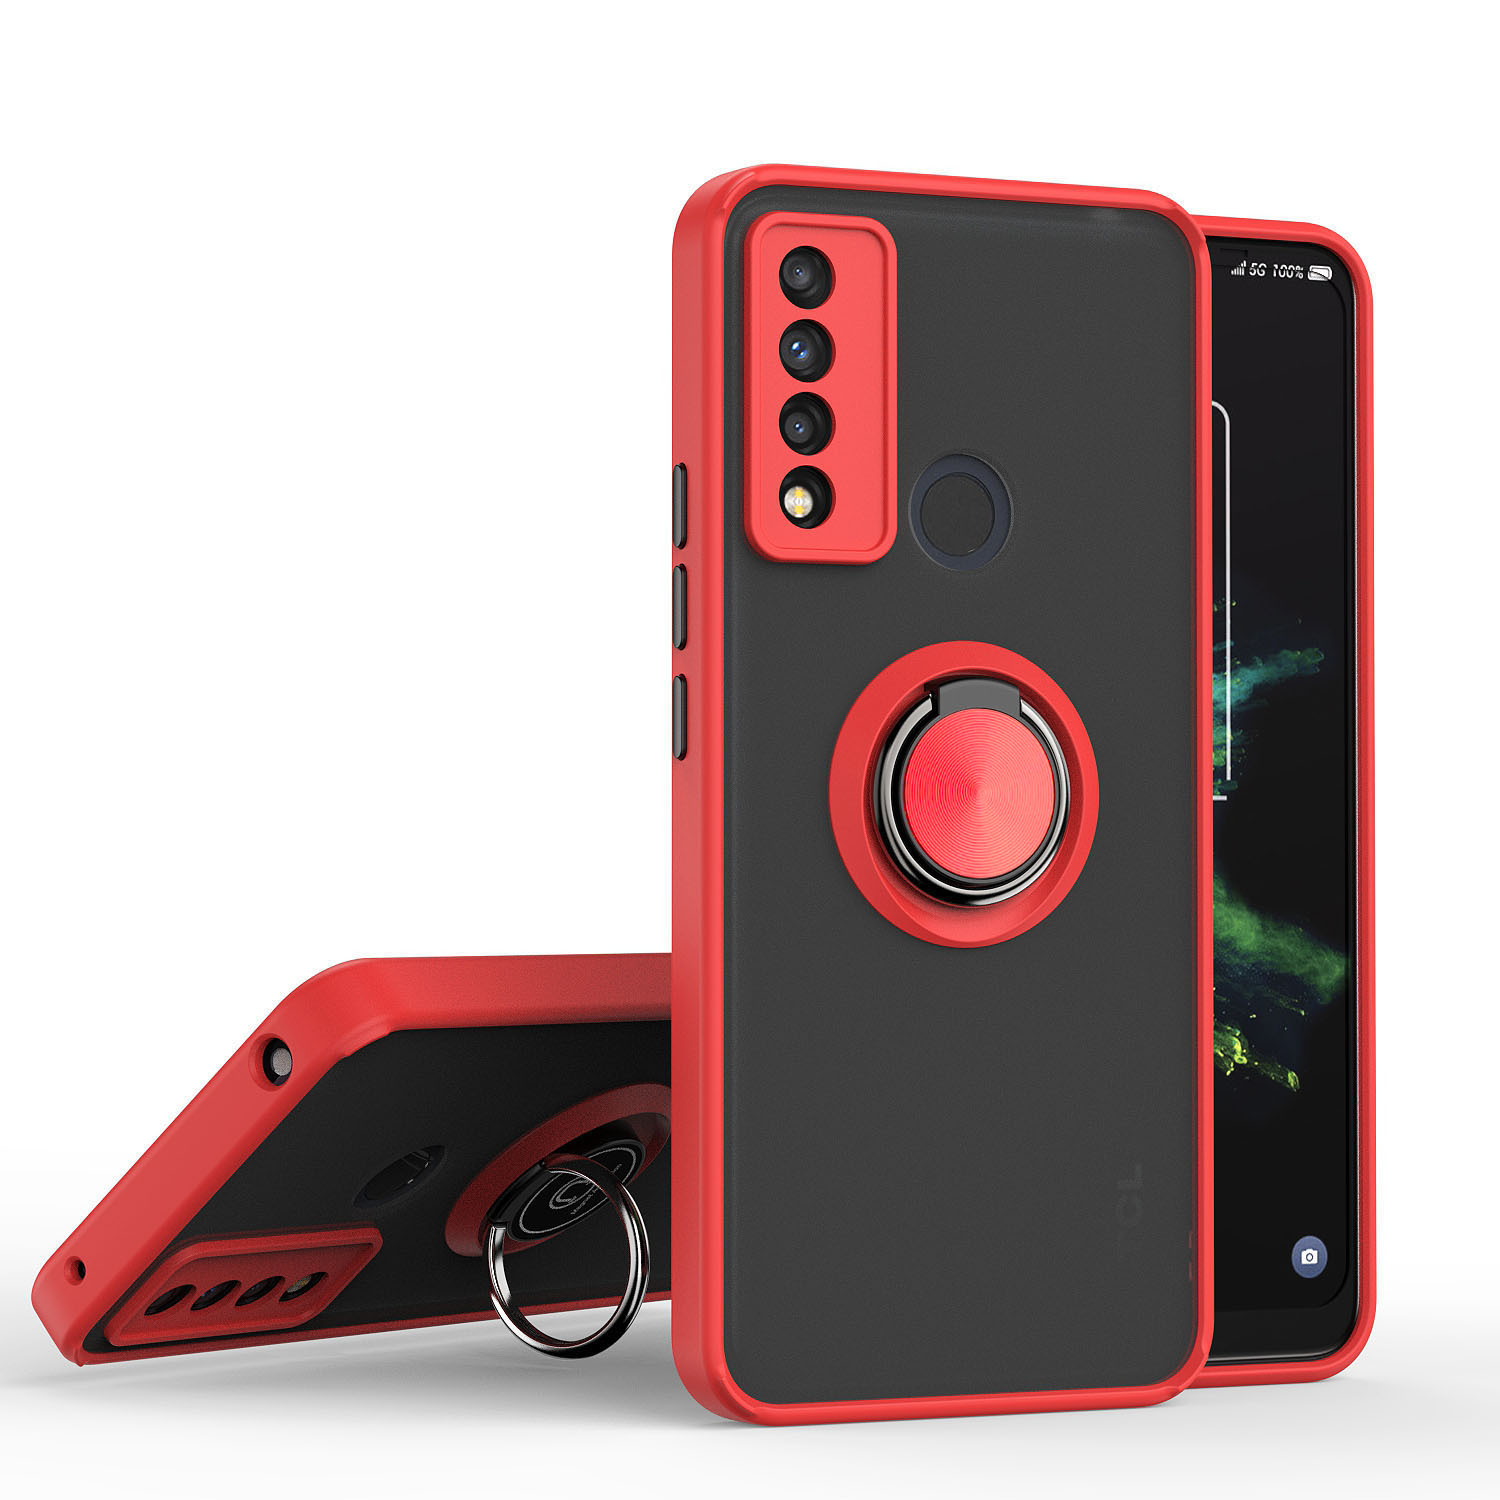 Tuff Slim Armor Hybrid RING Stand Case for TCL 20 XE (Red)